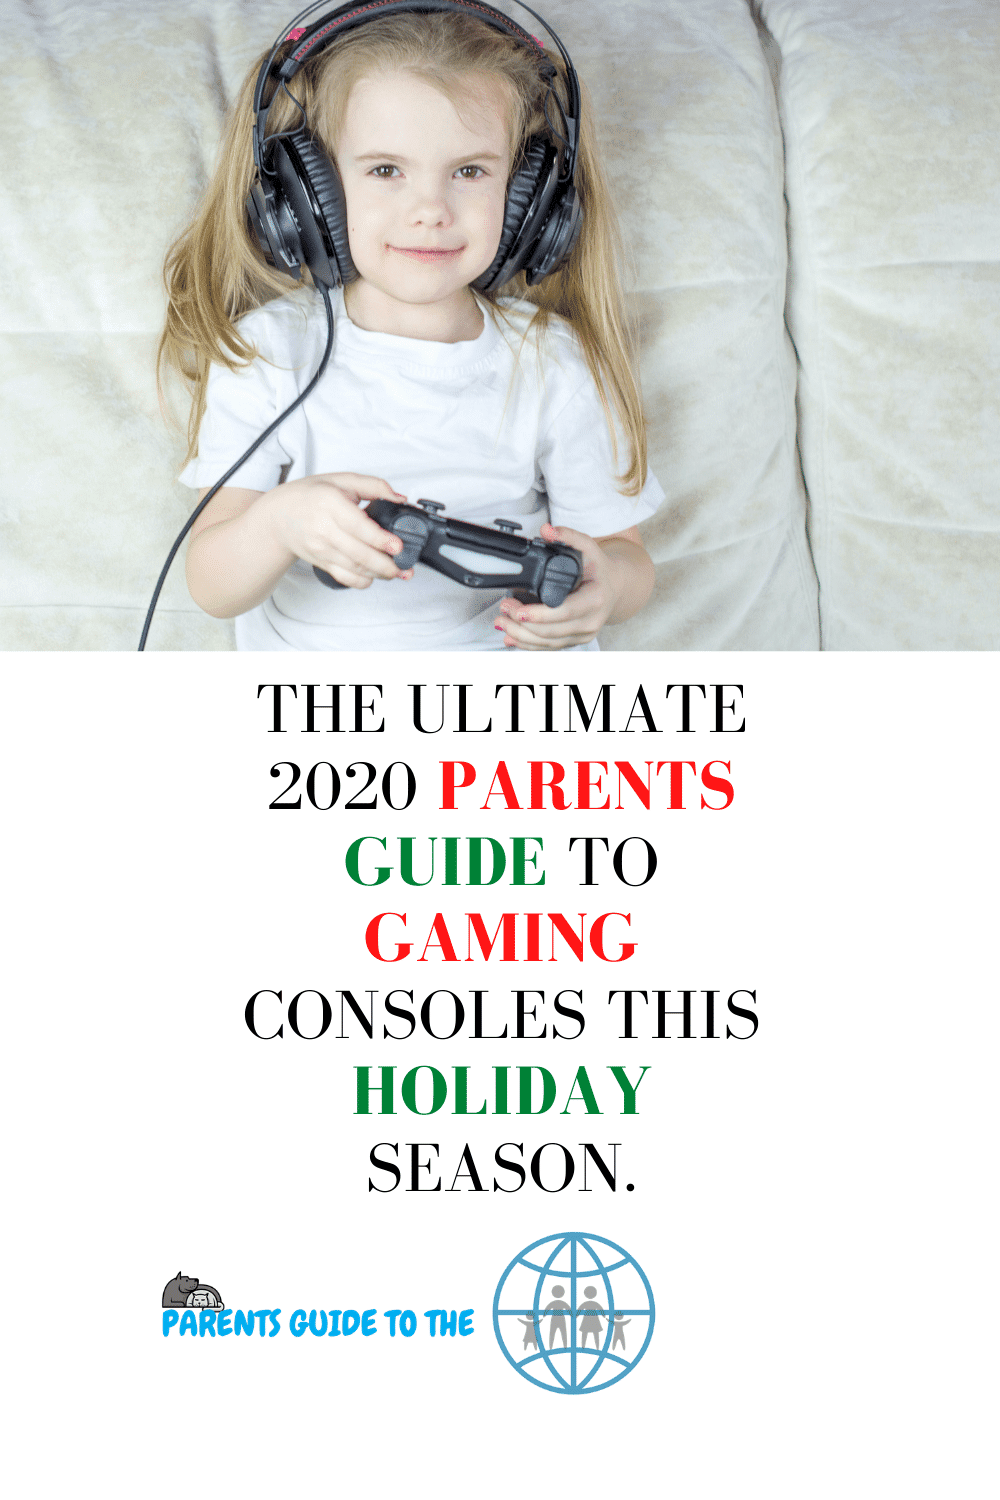 Ulimate parents guide to 2020 VIDEO GAME consoles 1